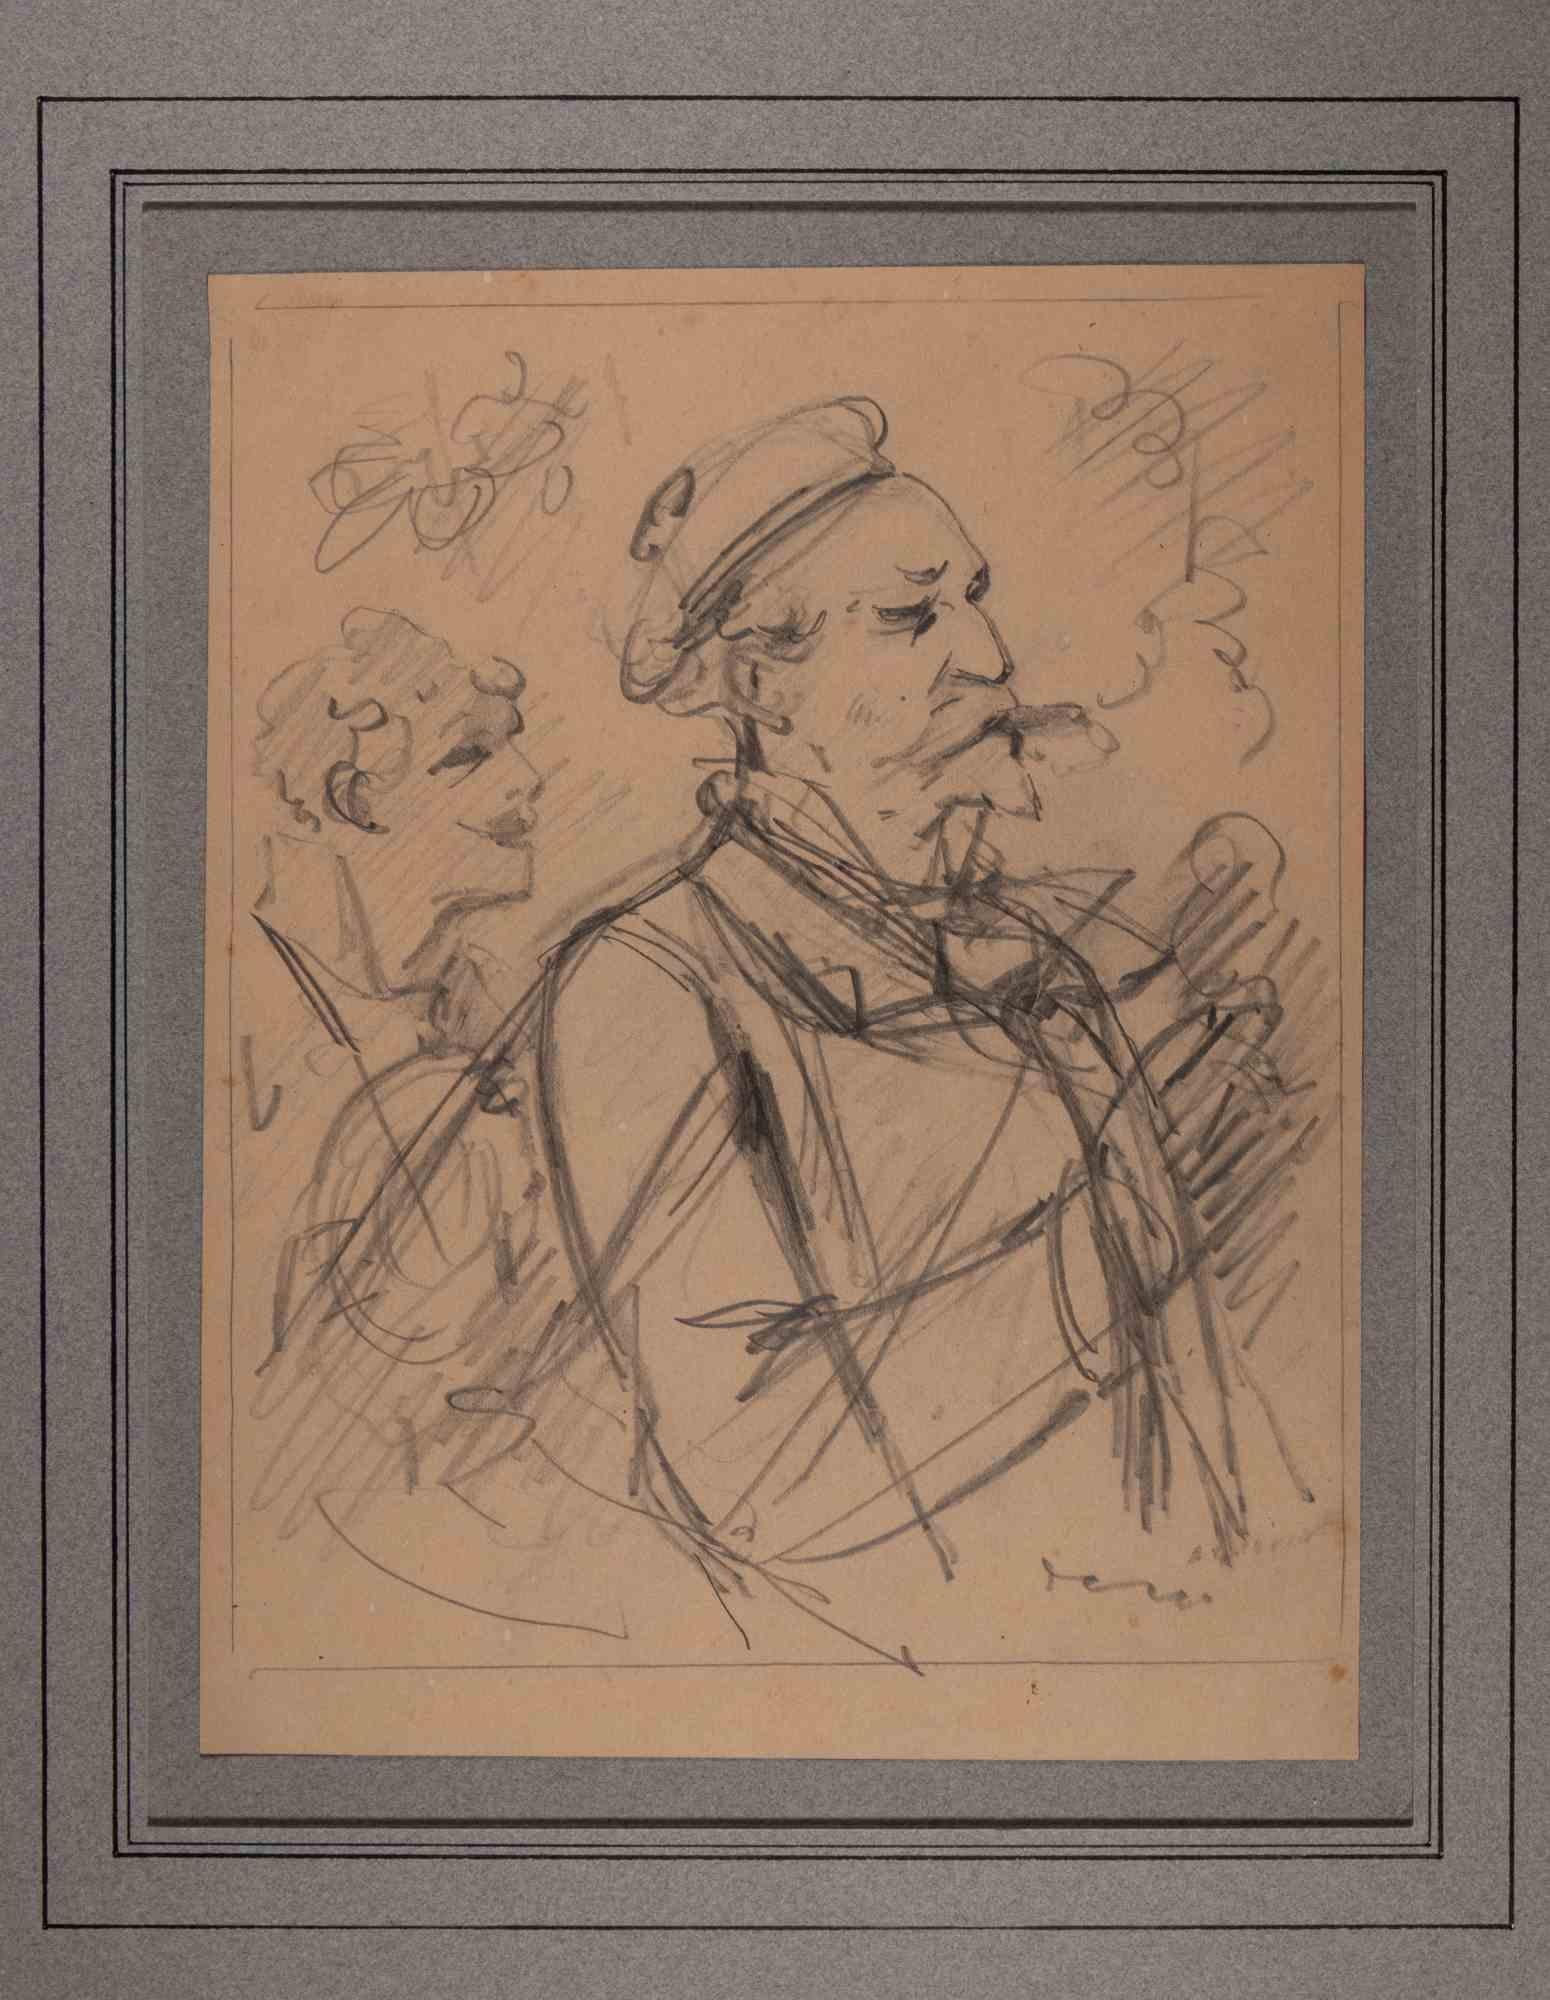 Alfred Grevin Figurative Art - Self-Portrait - Original Drawing by Alfred Grévin - Late 19th Century